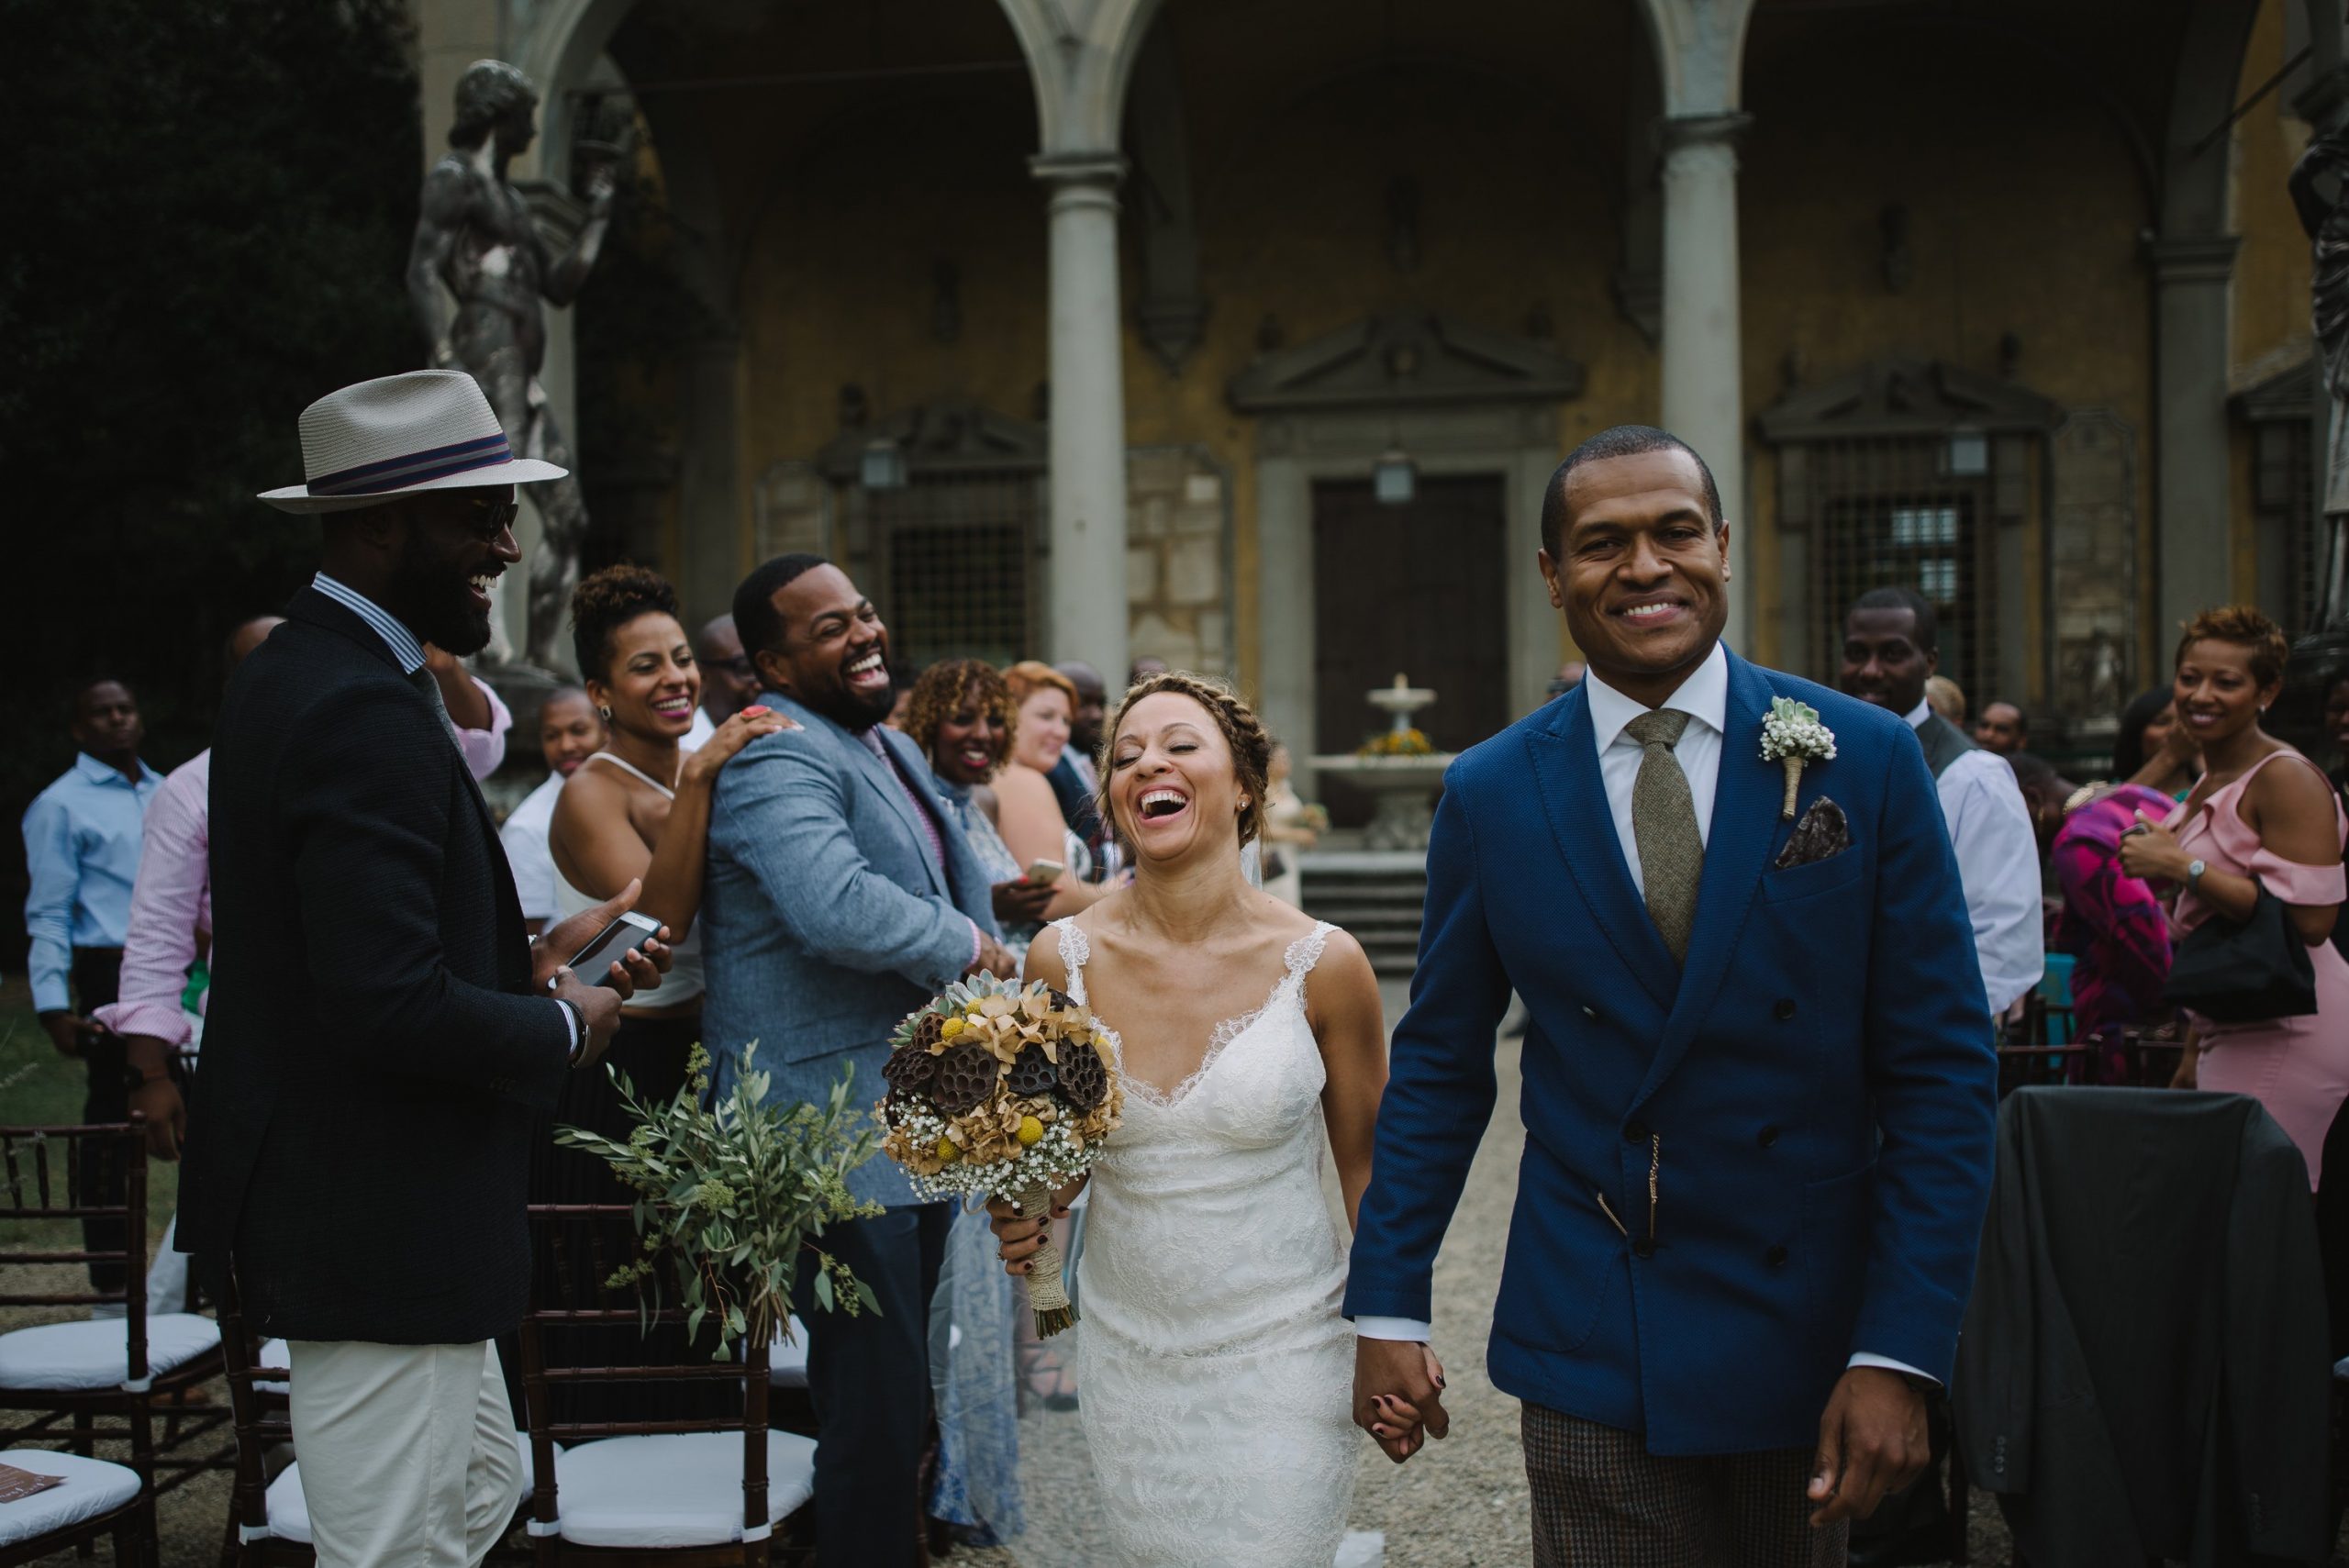 Wedding photographer at Giardino Corsini. Leticia and Troy came from US to celebrate their chic, destination wedding in Florence. Italian wedding photographer